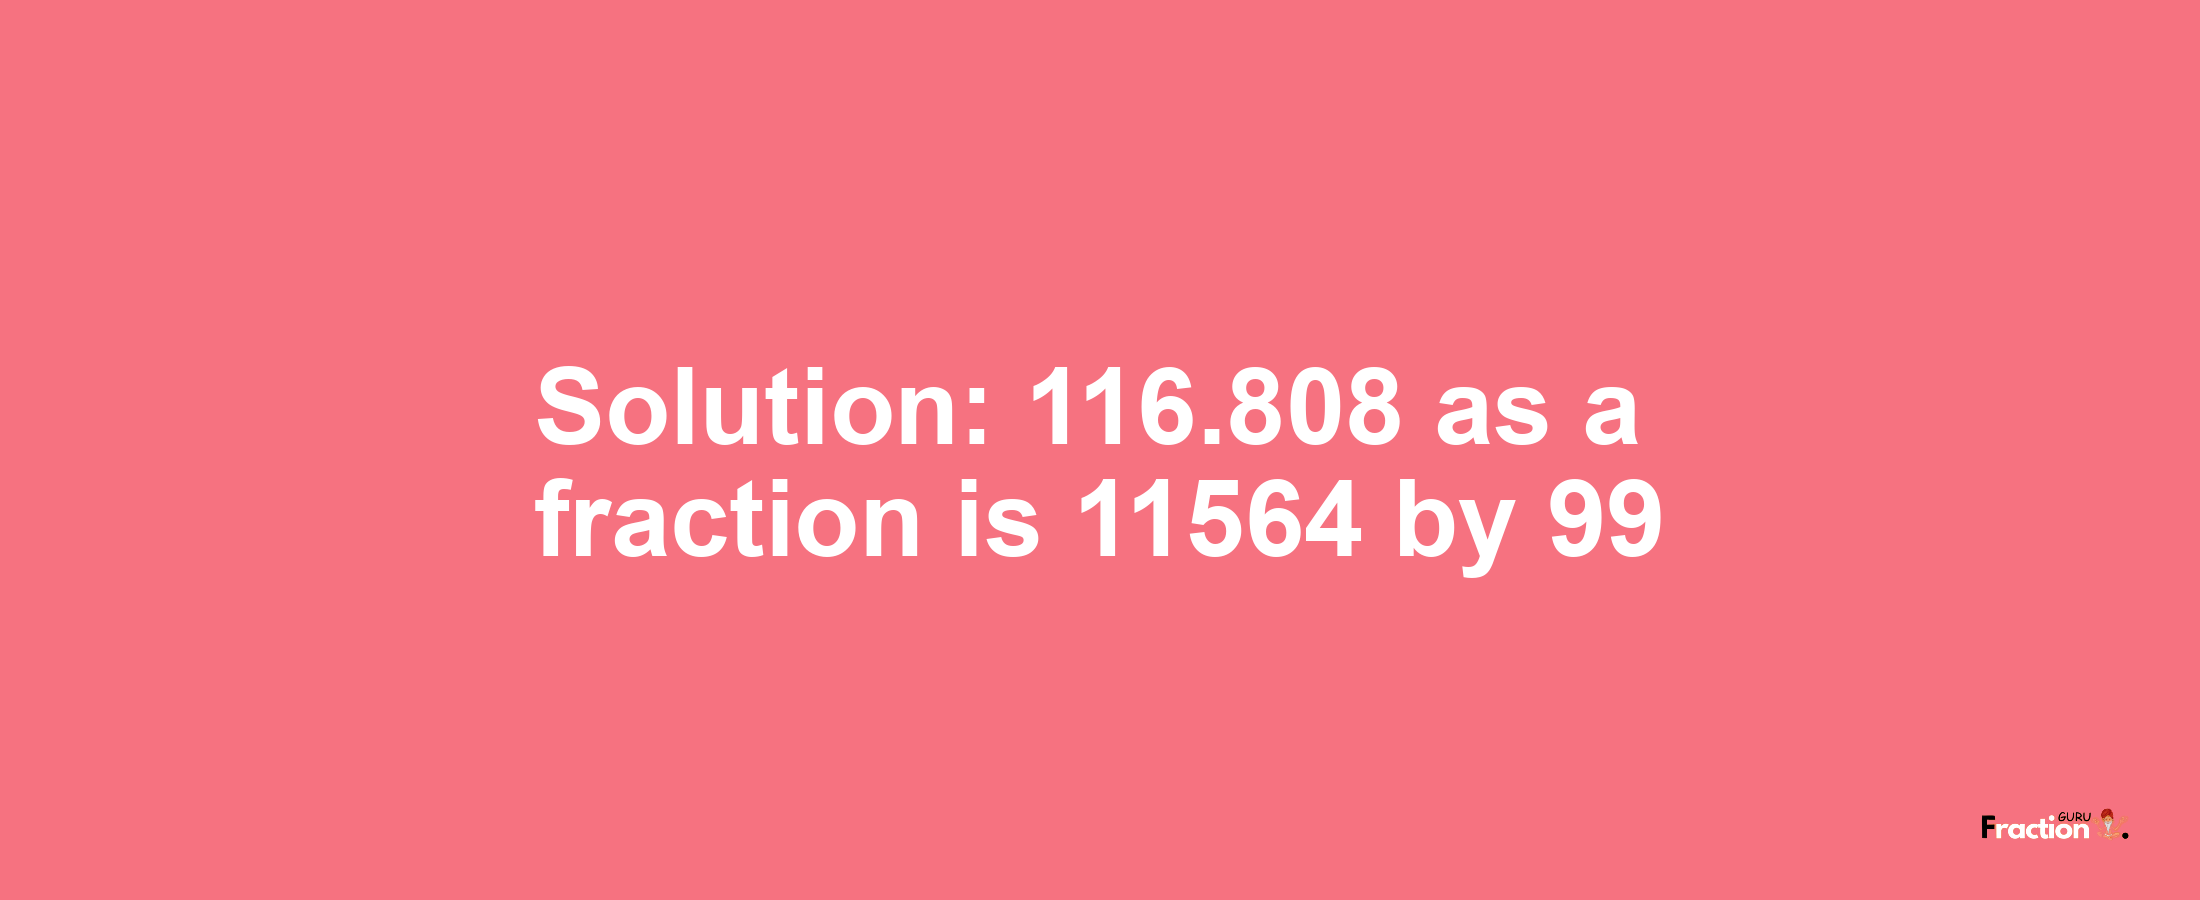 Solution:116.808 as a fraction is 11564/99